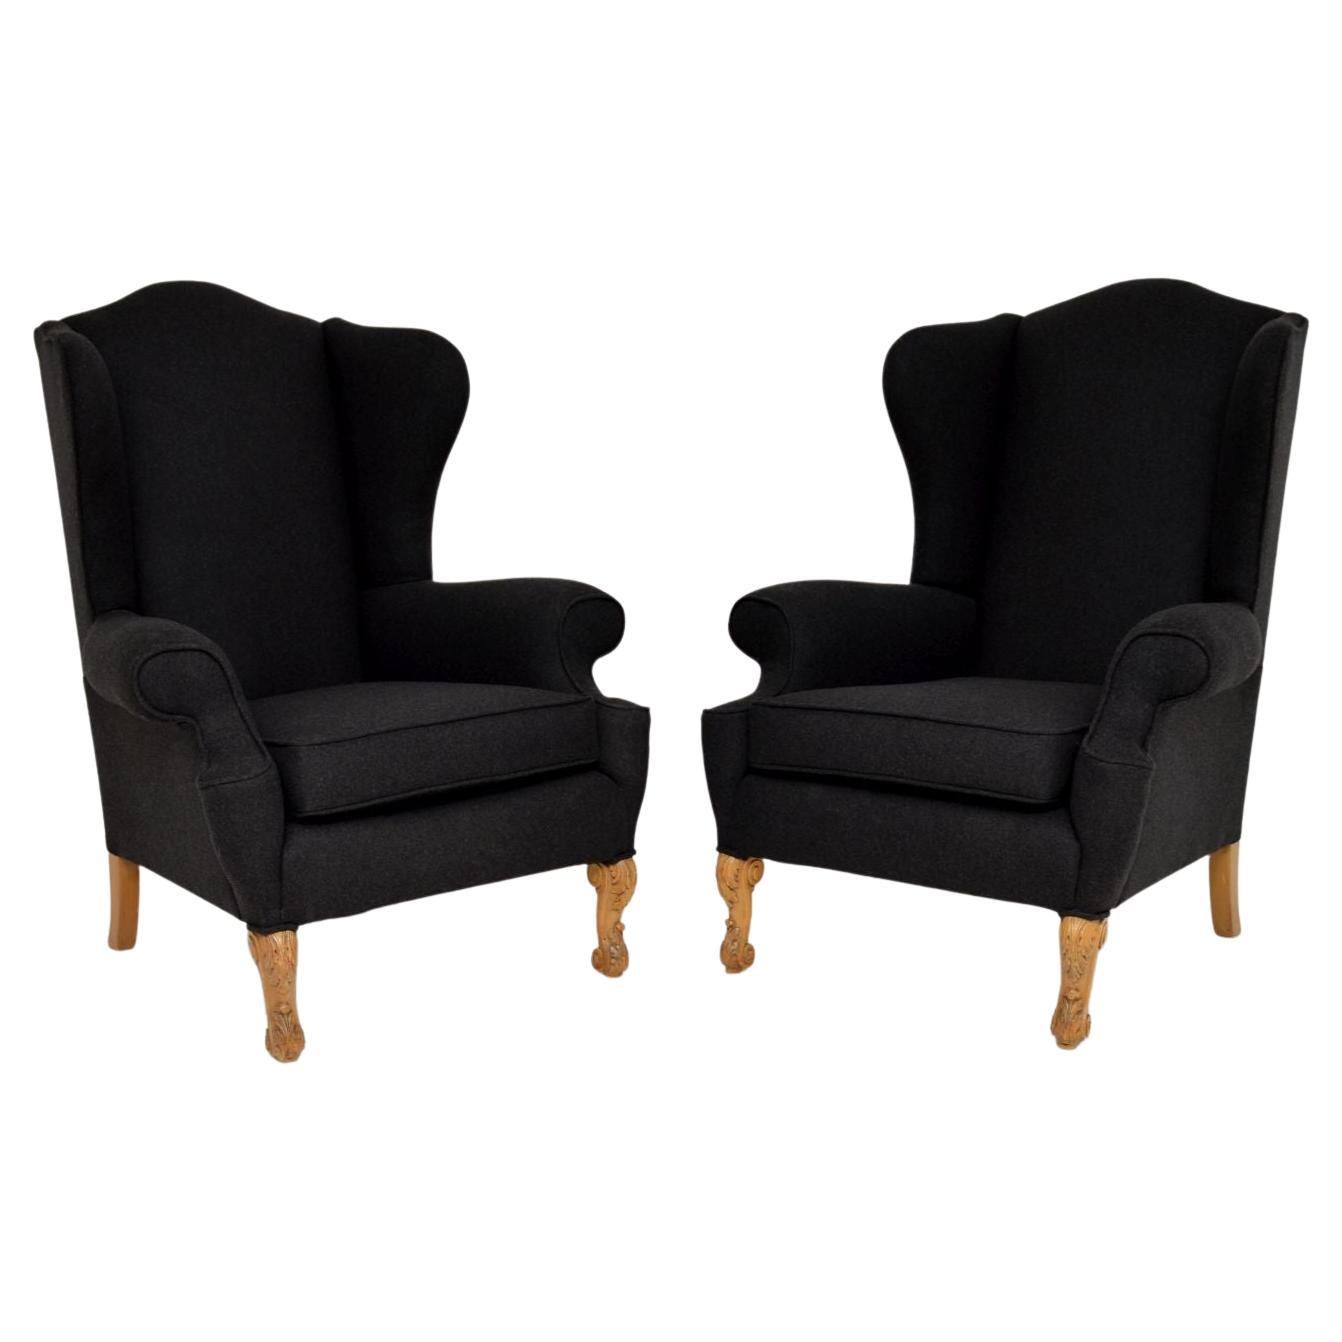 Pair of Antique Wing Back Armchairs by Hille